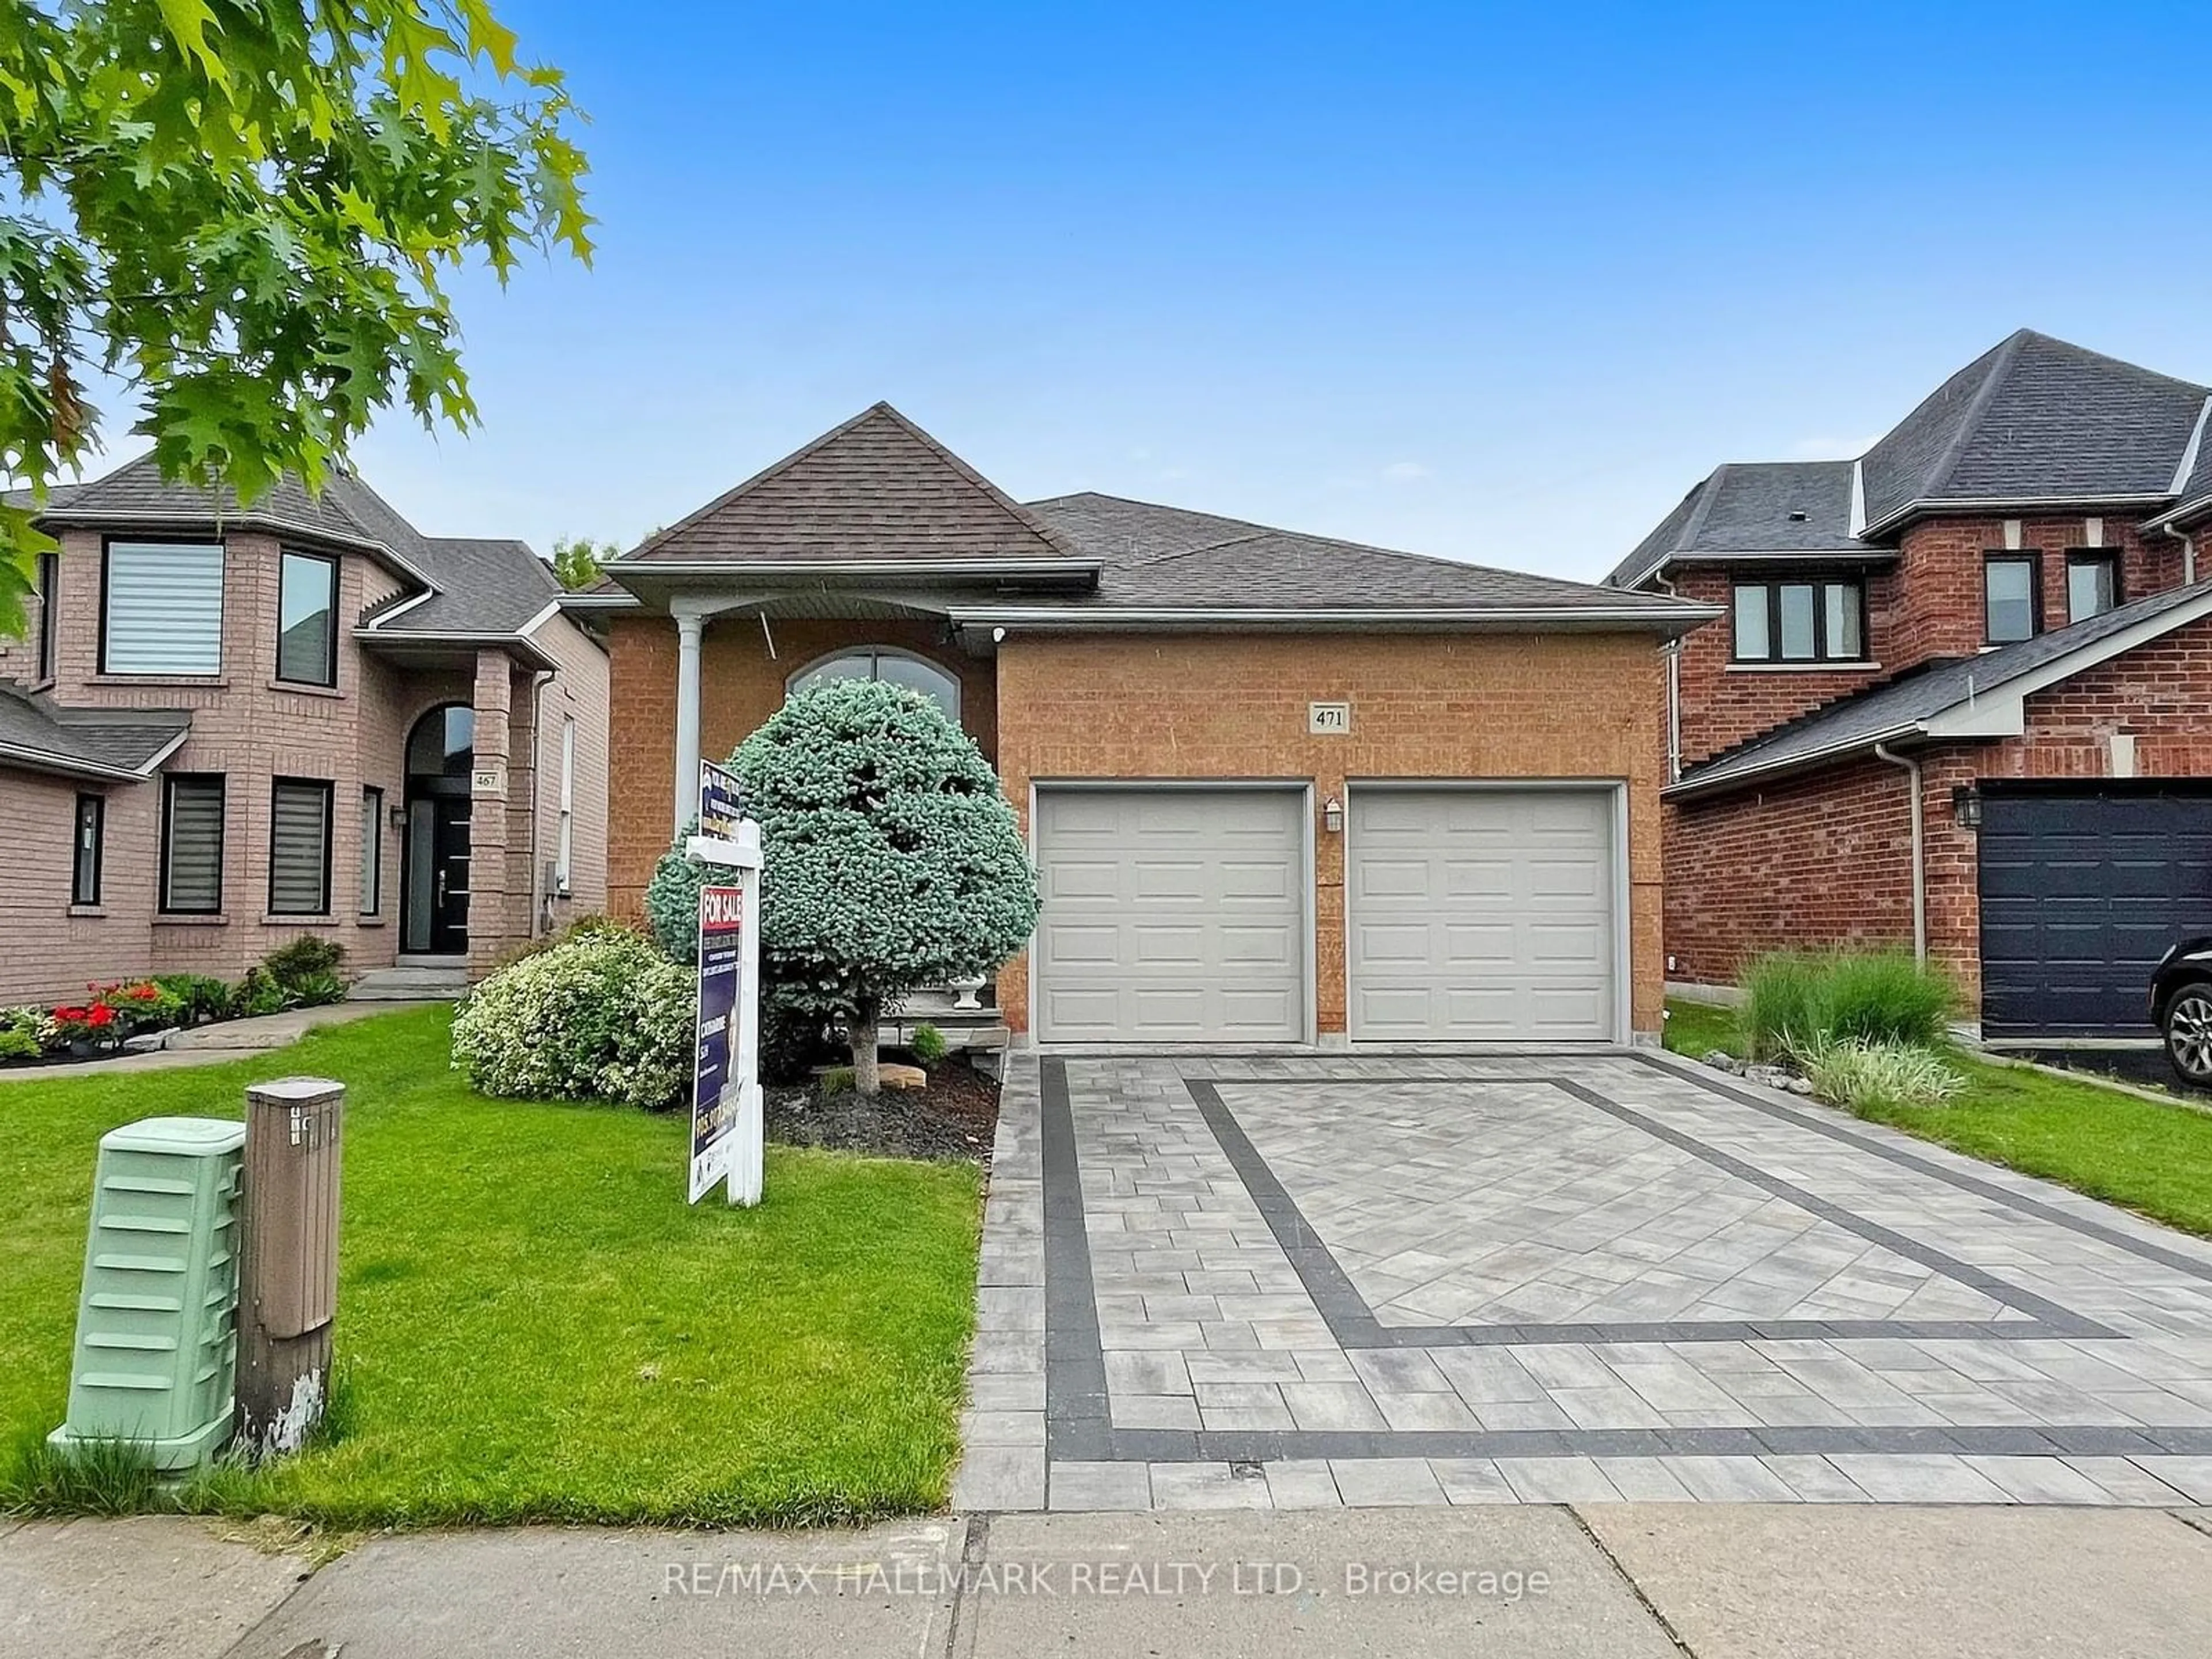 Home with brick exterior material for 471 Silken Laumann Dr, Newmarket Ontario L3X 2H9